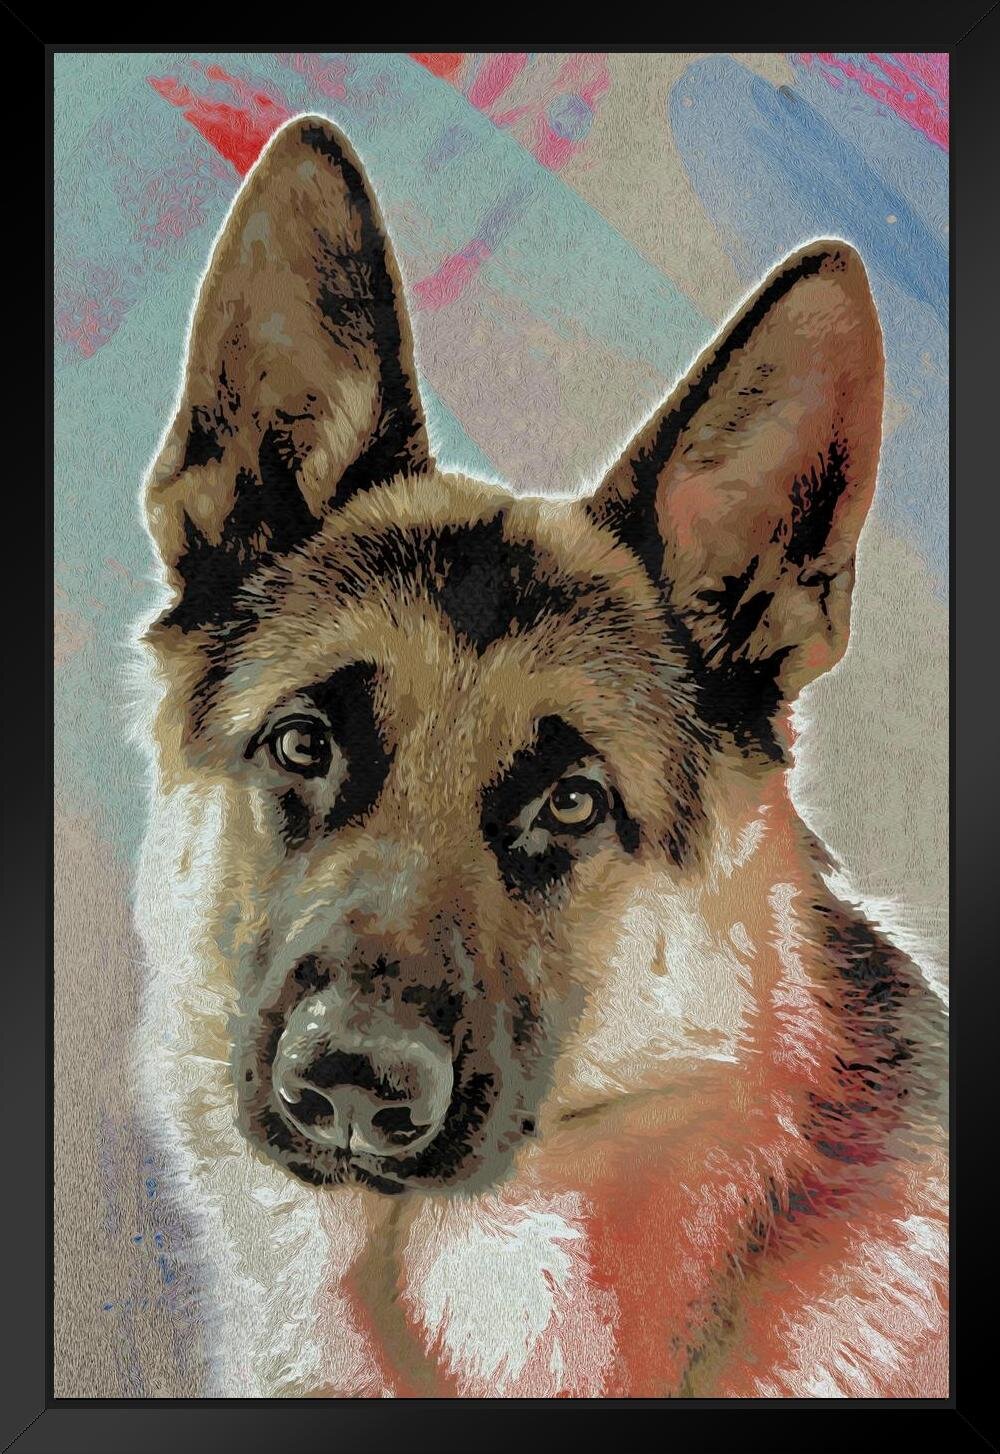 Red barrel studio dogs german shepherd painting color dog posters for wall funny dog wall art dog wall decor dog posters for kids bedroom animal wall poster cute animal posters matted framed